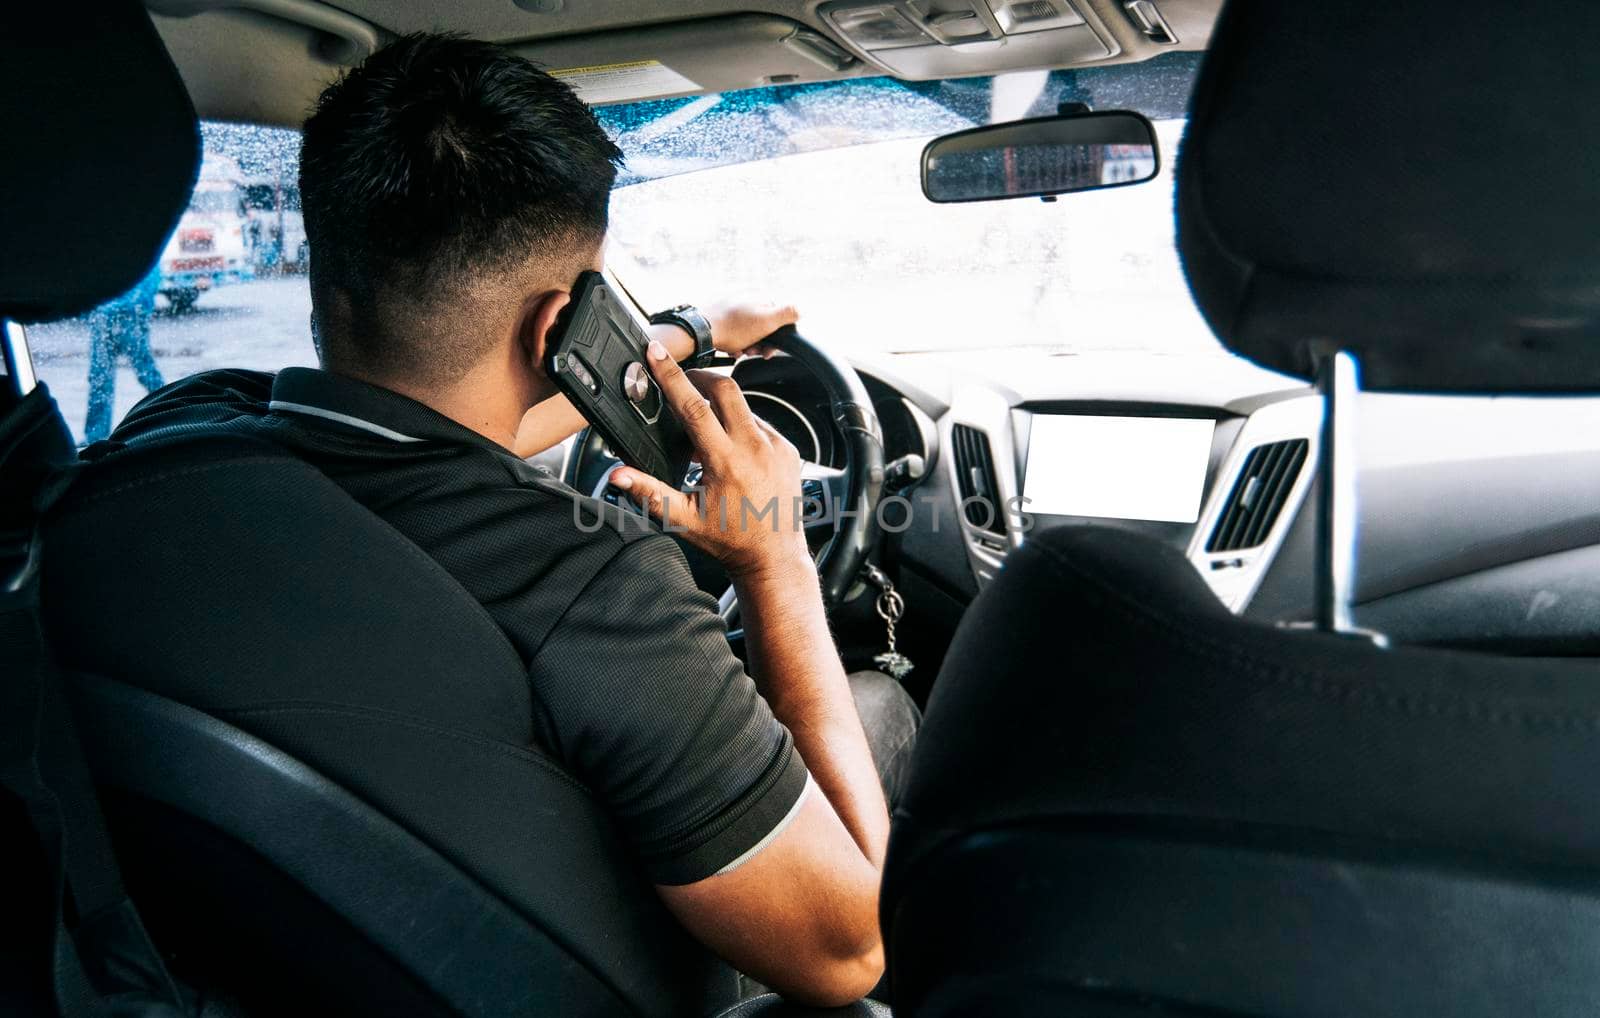 Man driver calling on the phone in his car, Back view of a young man sitting inside car using mobile phone, concept of man calling on the phone while driving